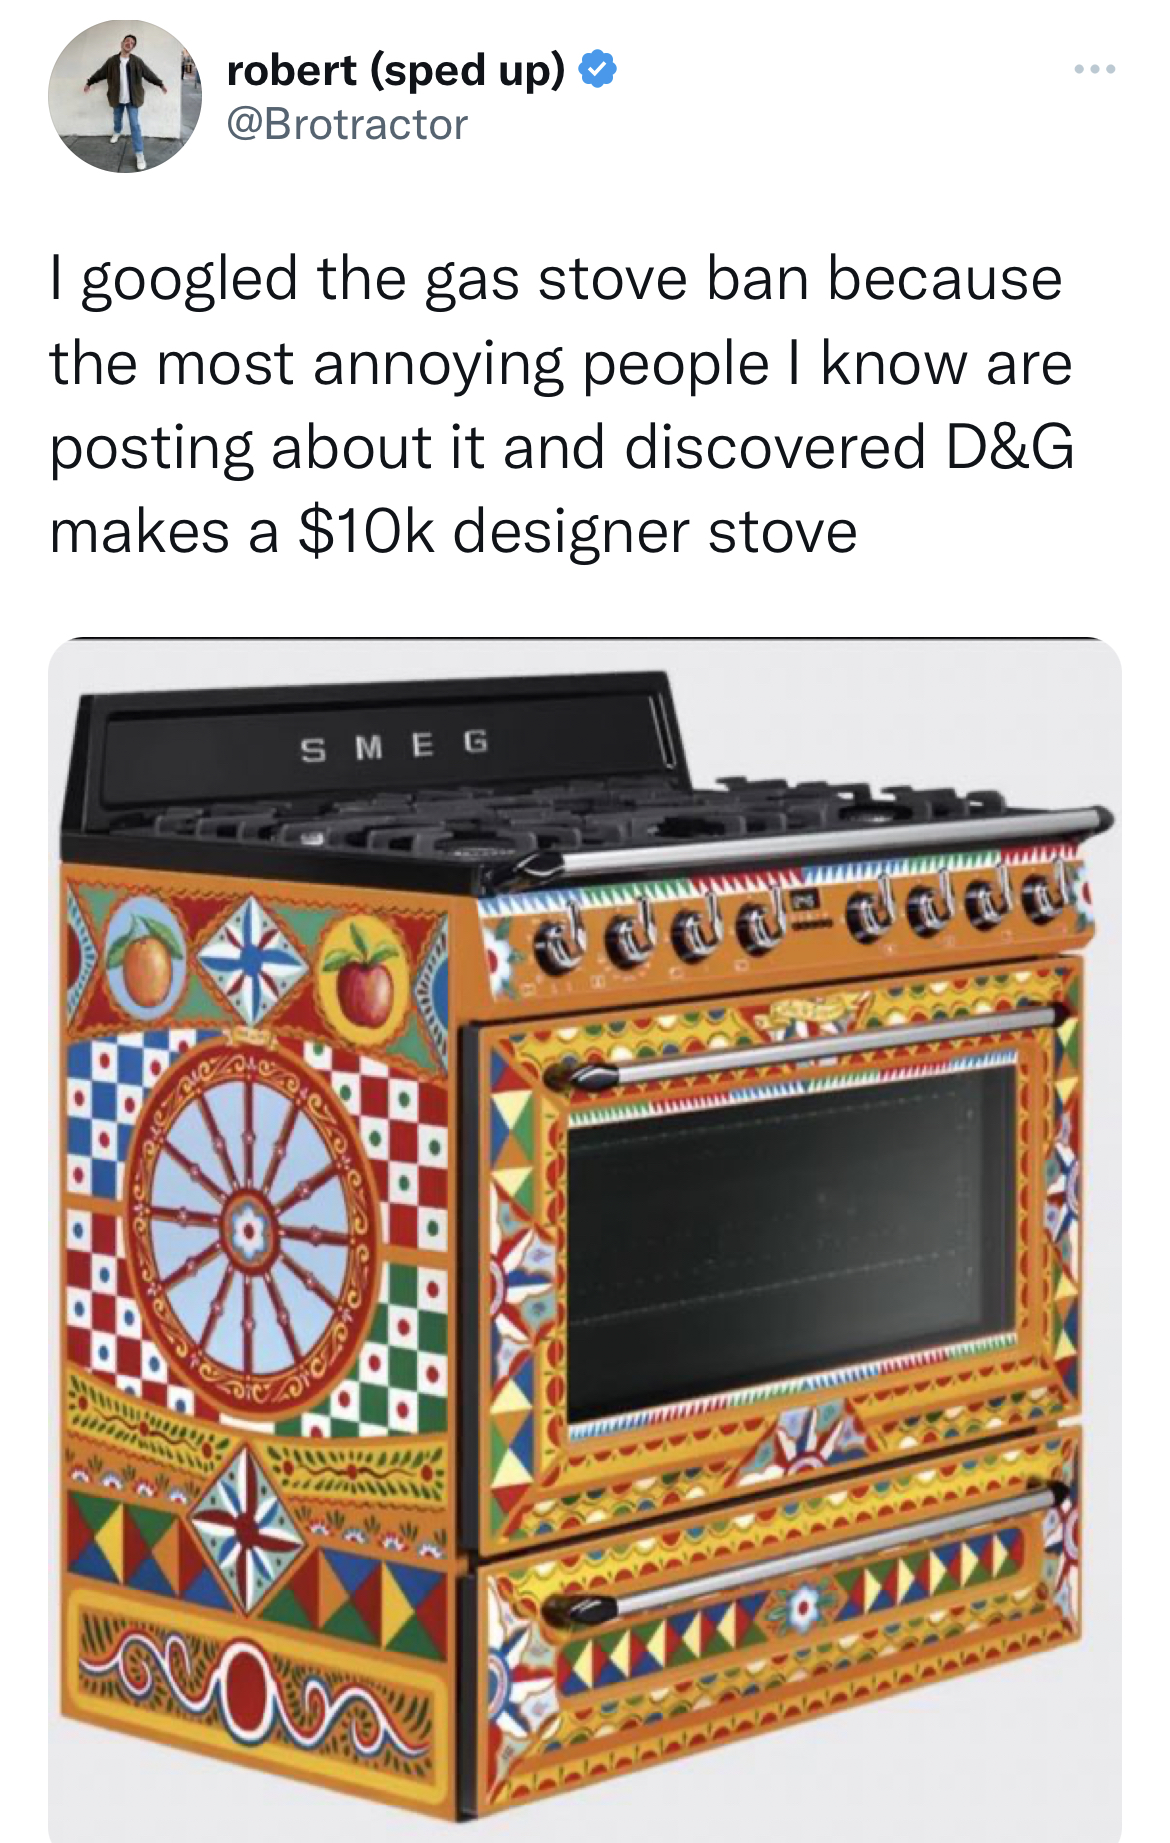 Gas Stove Ban Memes dolce gabbana x smeg - robert sped up I googled the gas stove ban because the most annoying people I know are posting about it and discovered D&G makes a $10k designer stove Smeg ocava 0000